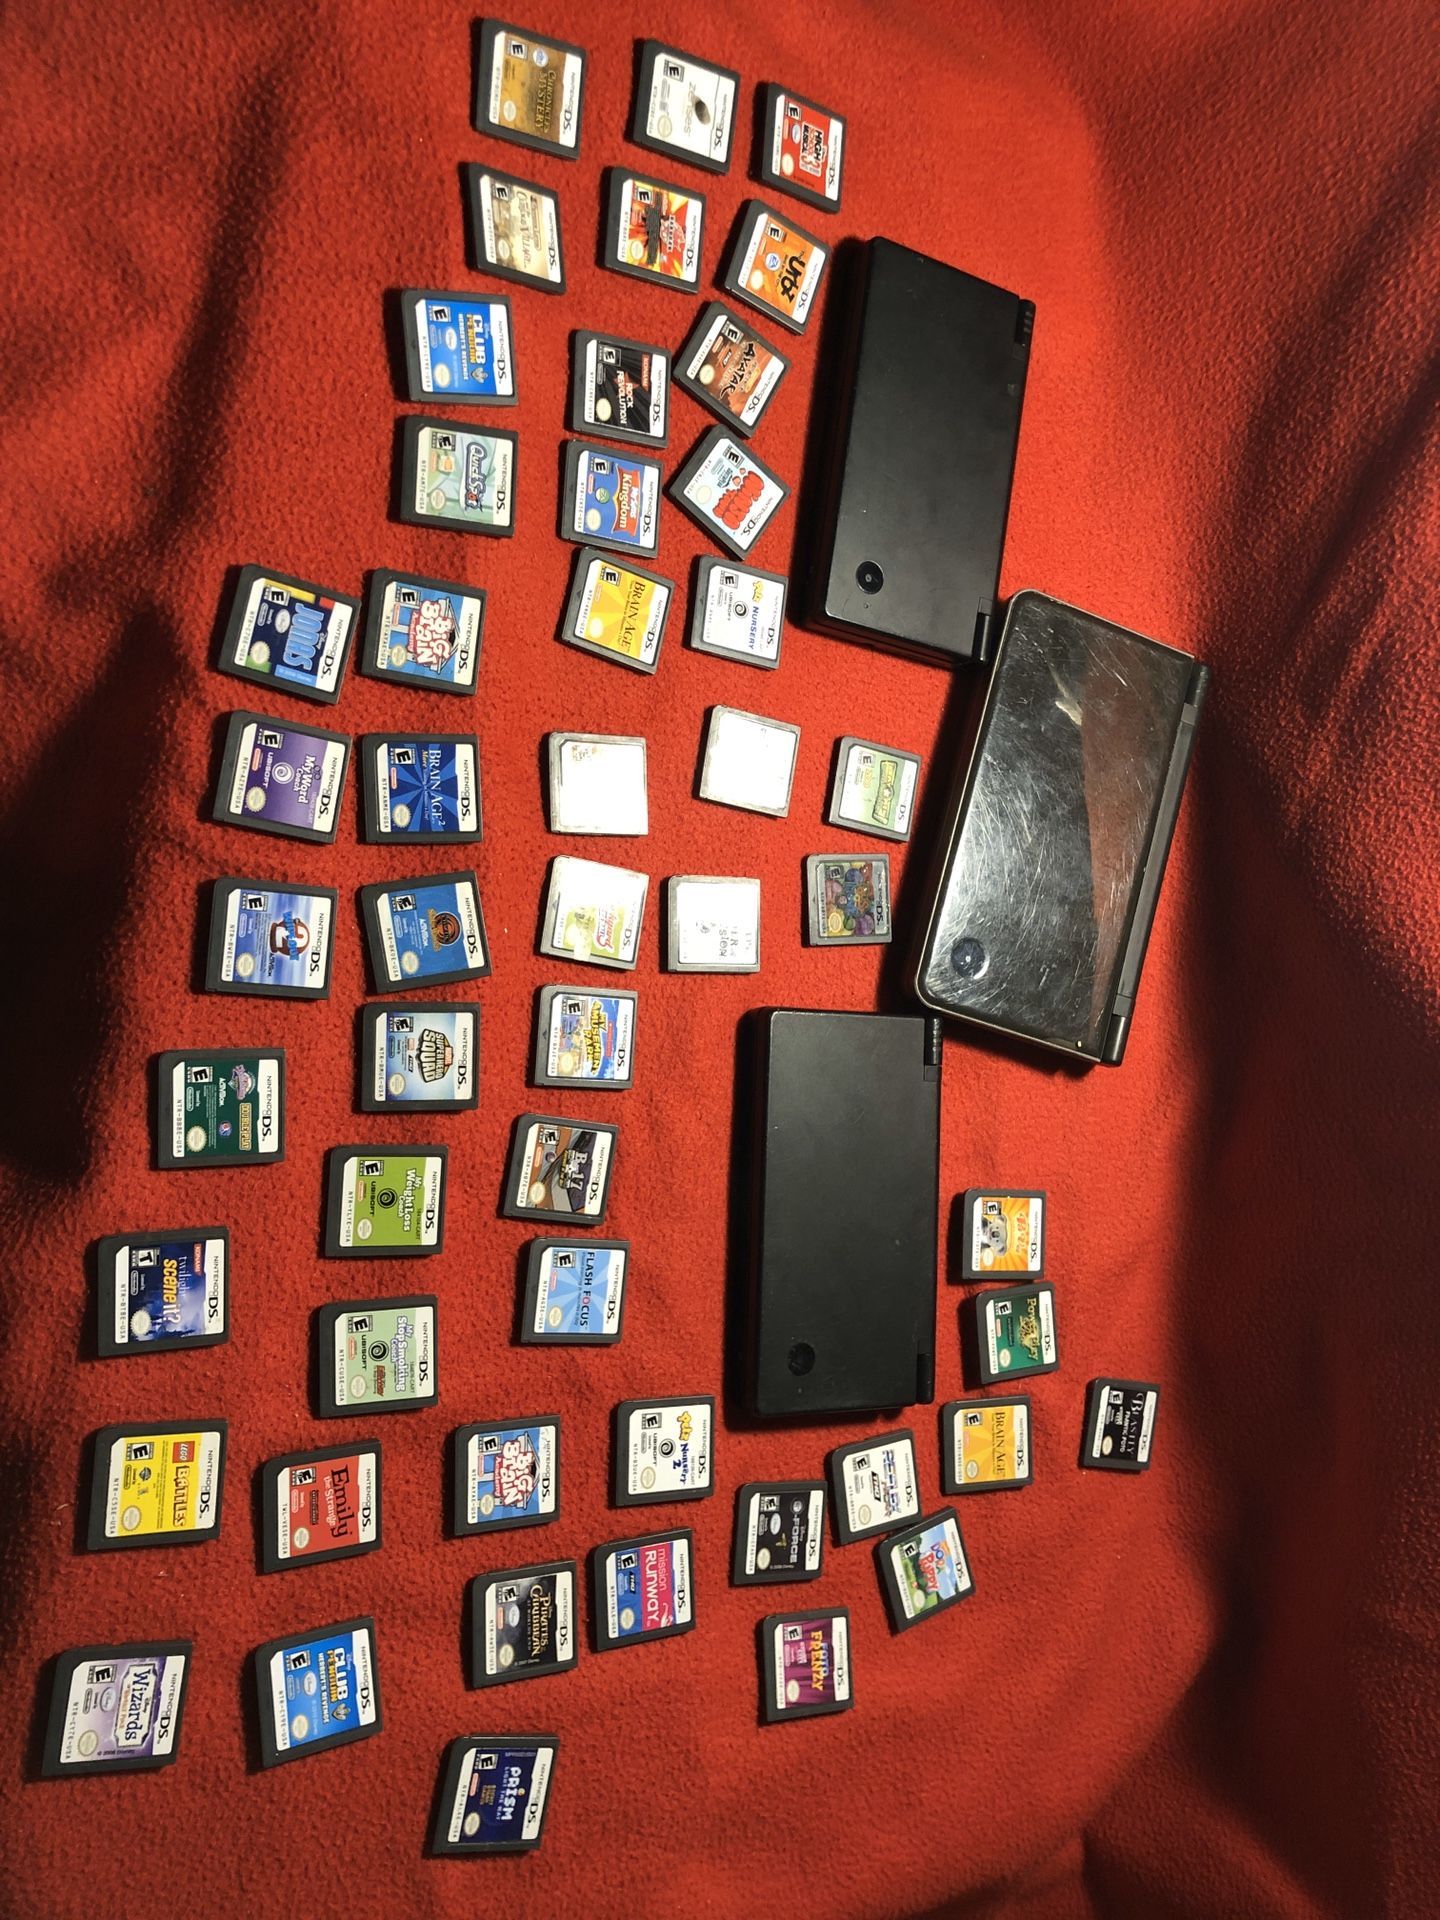 DSi with 5 games $59 - DSi XL with 5 games